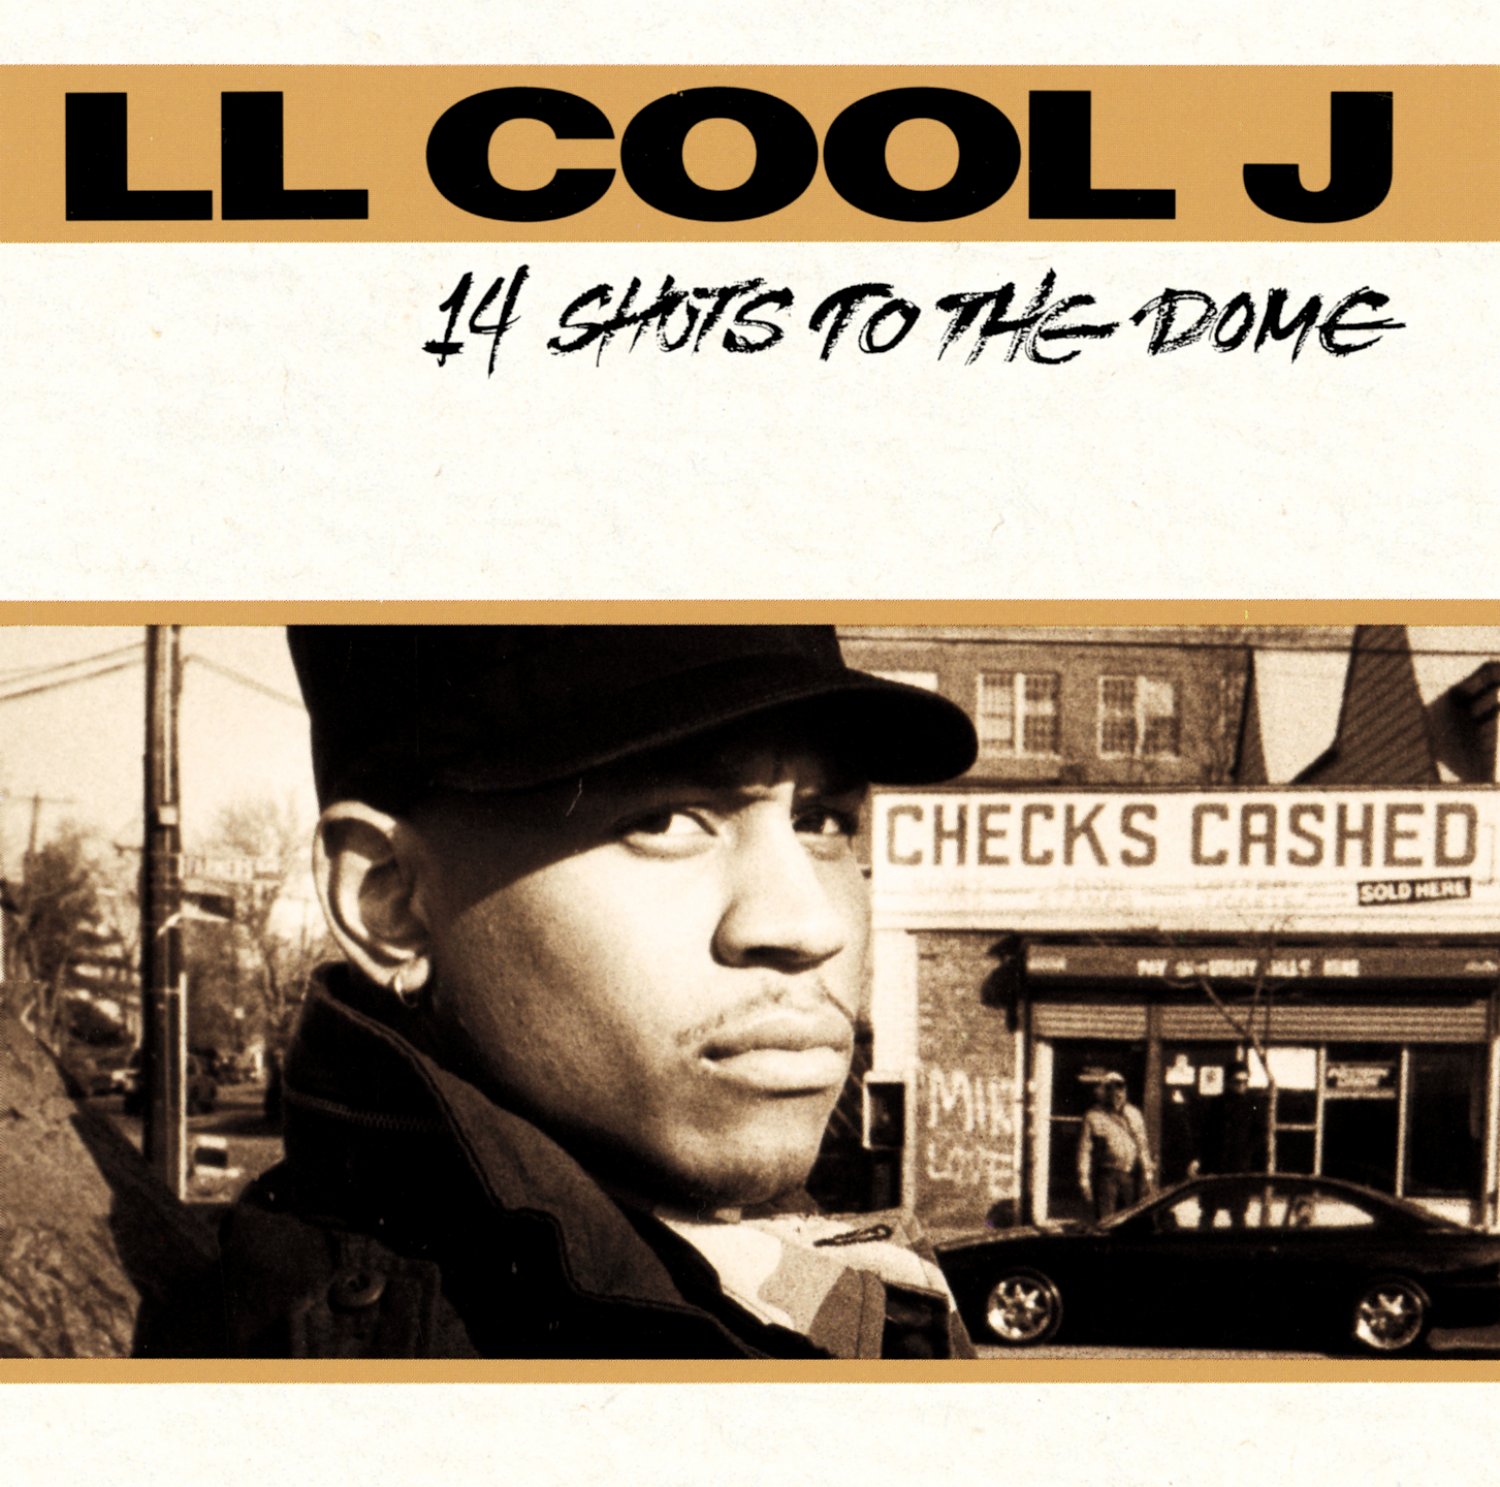 14 shots to the dome ll cool j album art download buy itunes